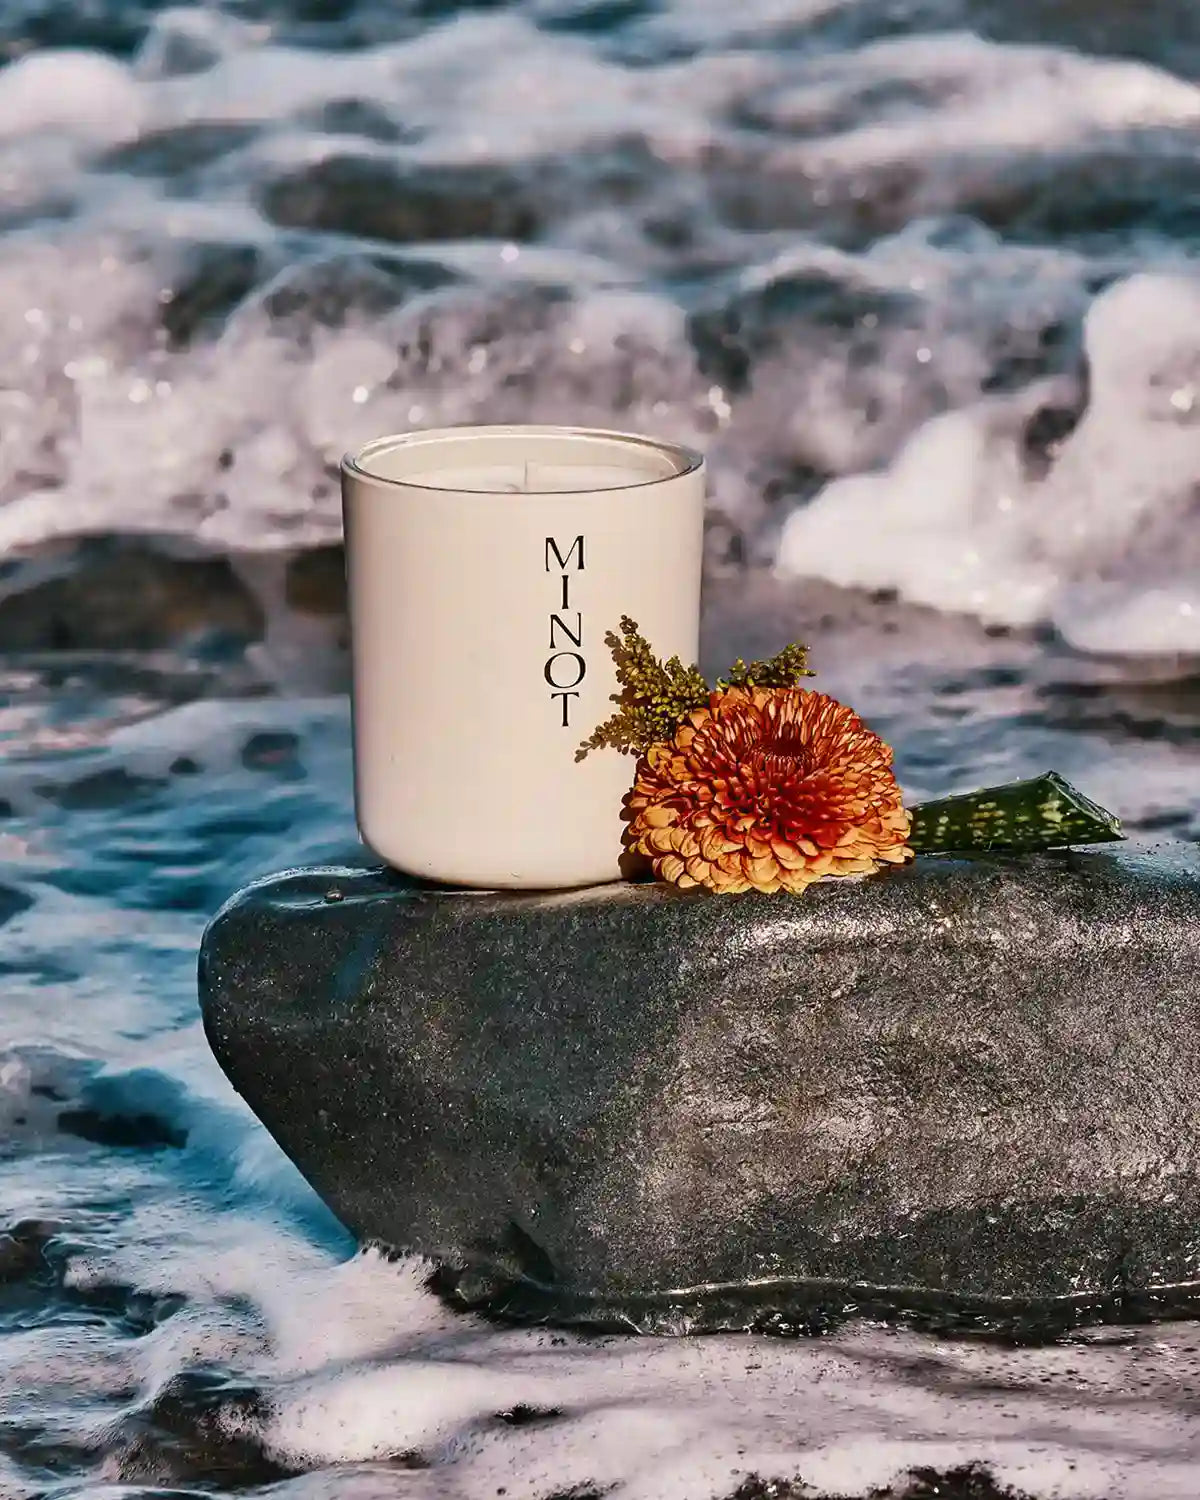 The Terrene candle, a chrysanthemum bloom, and an aloe leaf sit on a rock, surrounded by ocean waves